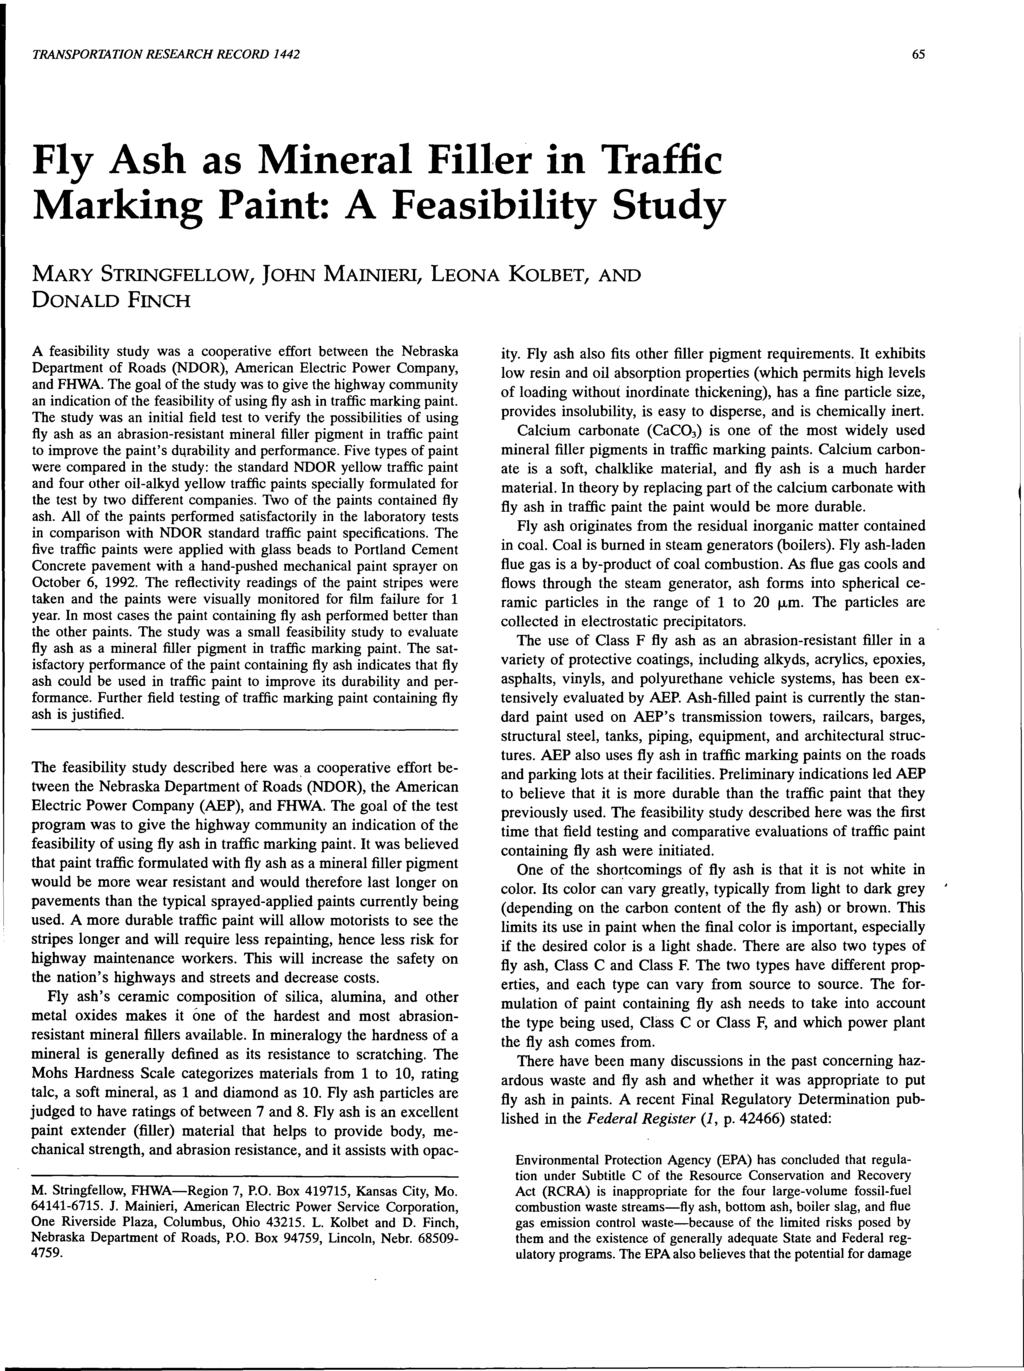 TRANSPORIATION RESEARCH RECORD 1442 6 Fly Ash as Mineral Filler in Traffic Marking Paint: A Feasibility Study MARY STRINGFELLOW, JOHN MAINIERI, LEONA KOLBET, AND DONALD FINCH A feasibility study was